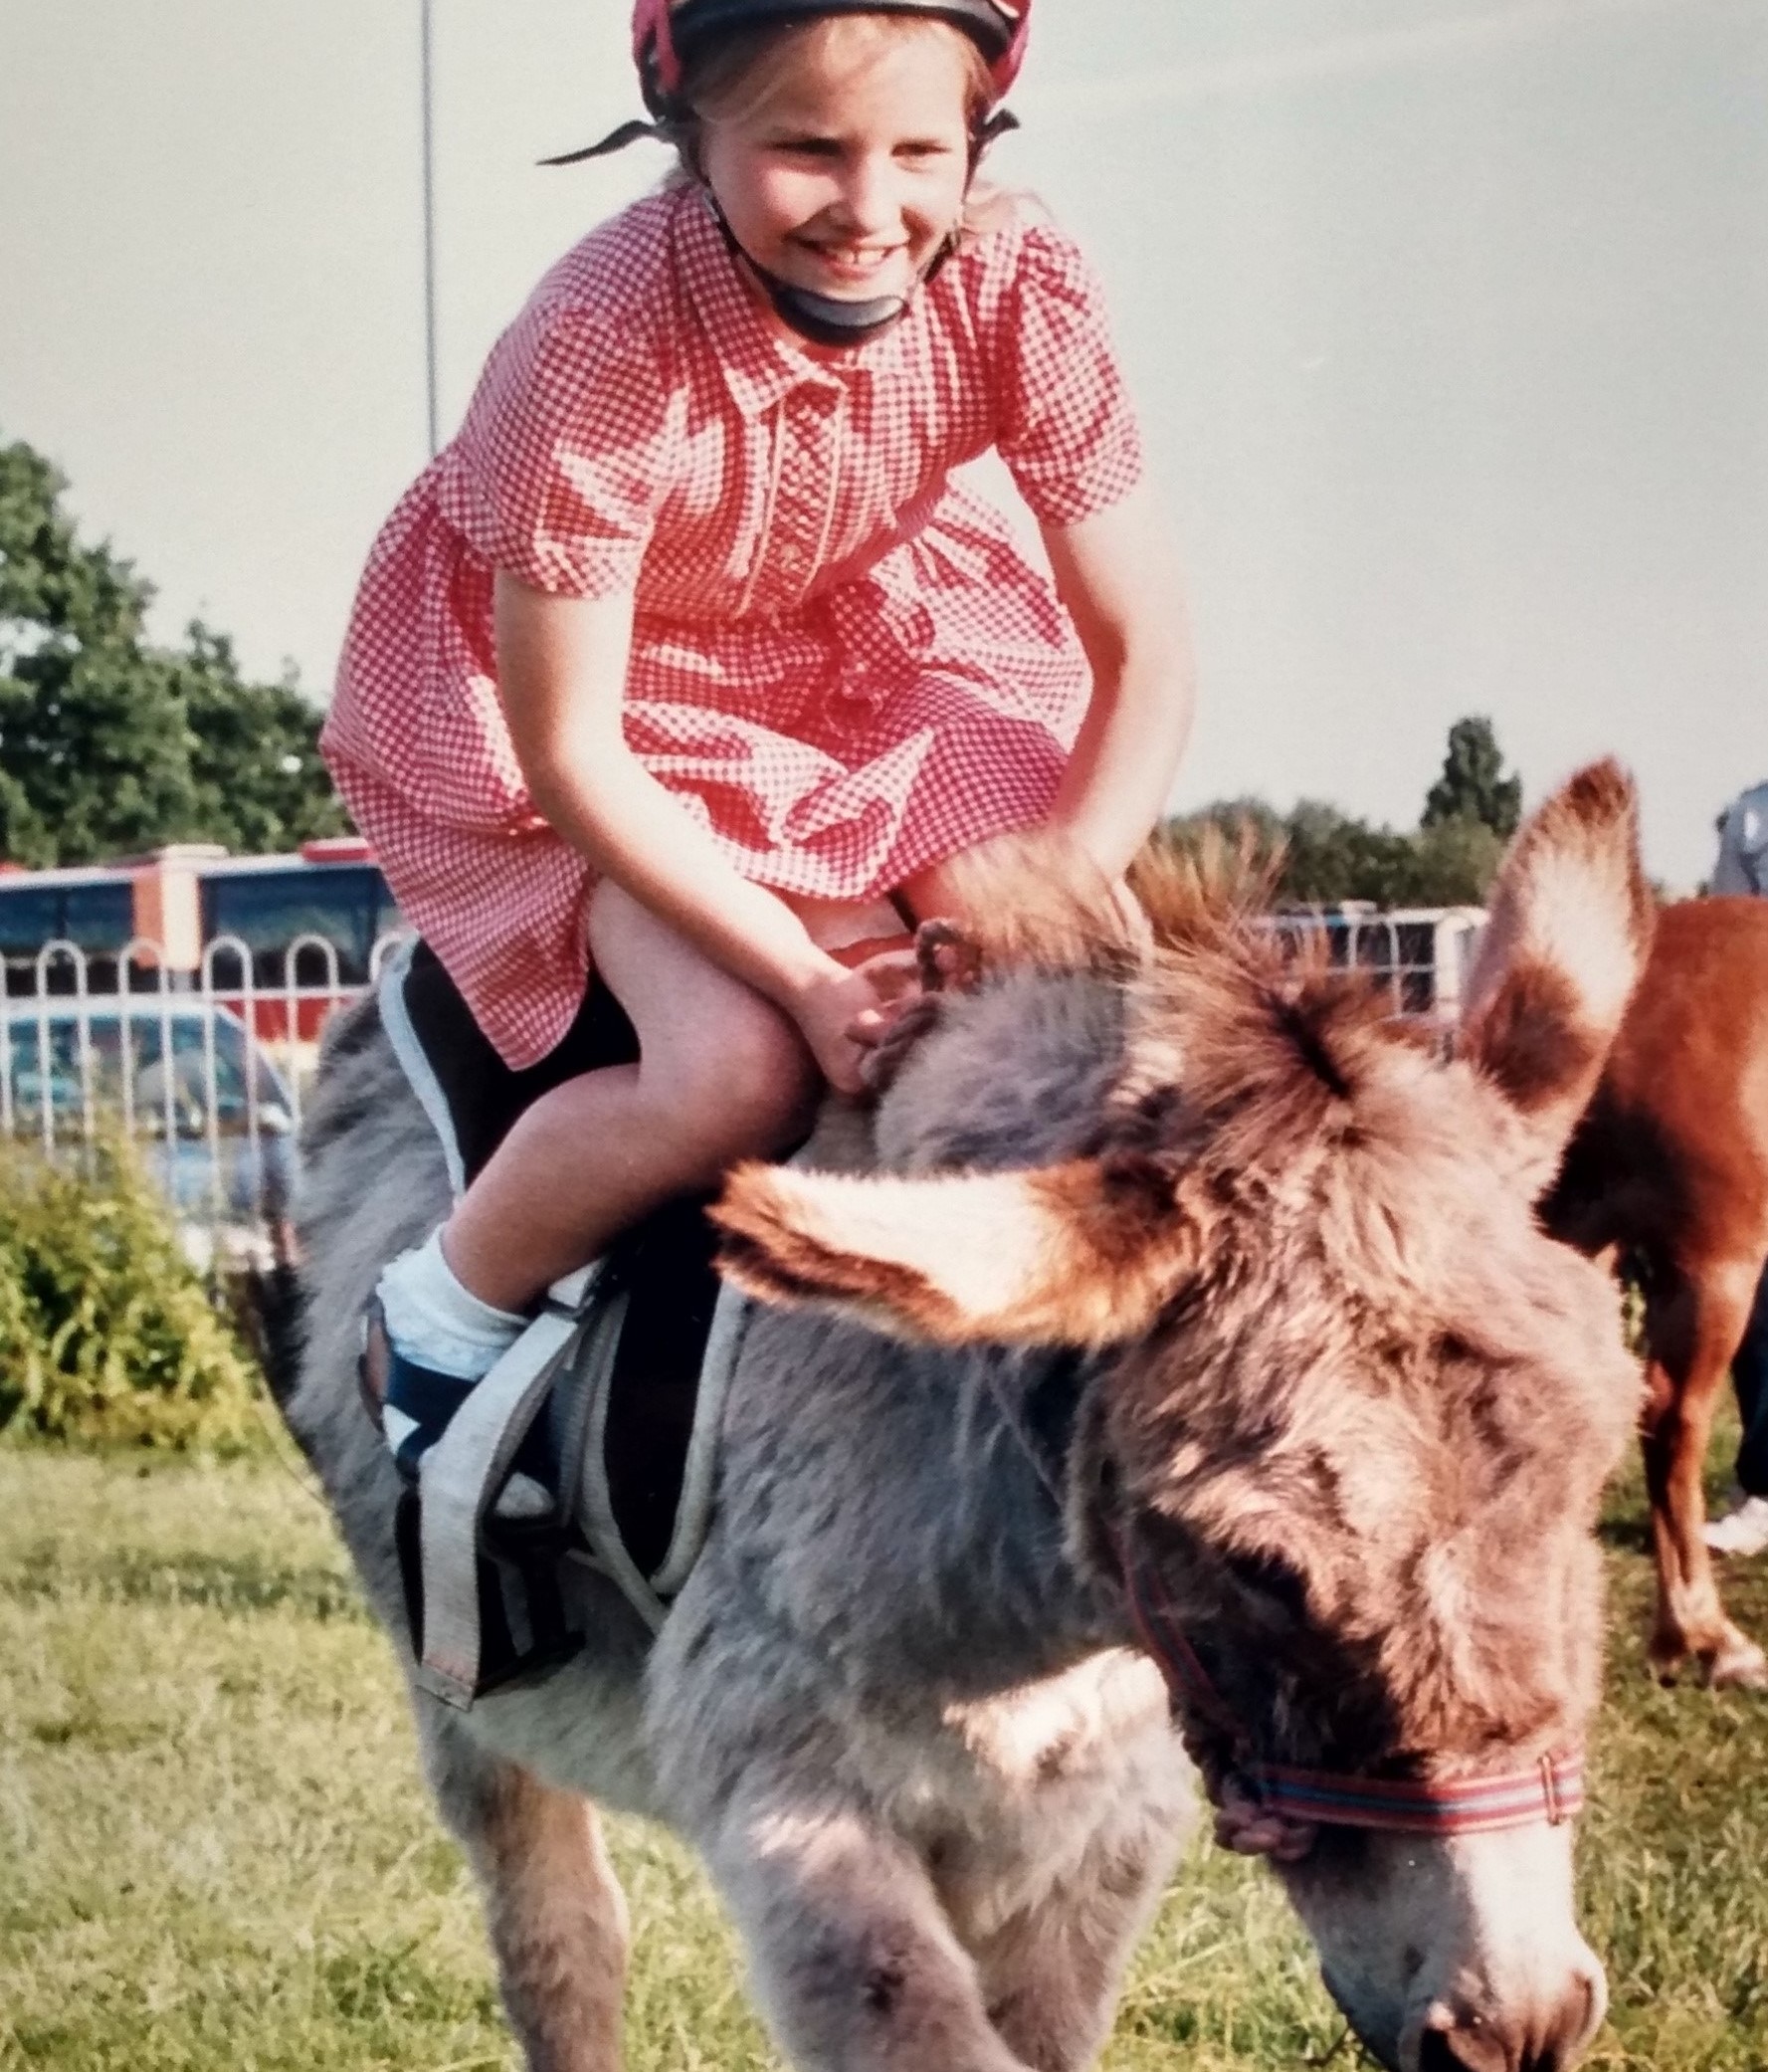 A summer evening in June 1995 and Victoria Brown is aboard Teddy the donkey